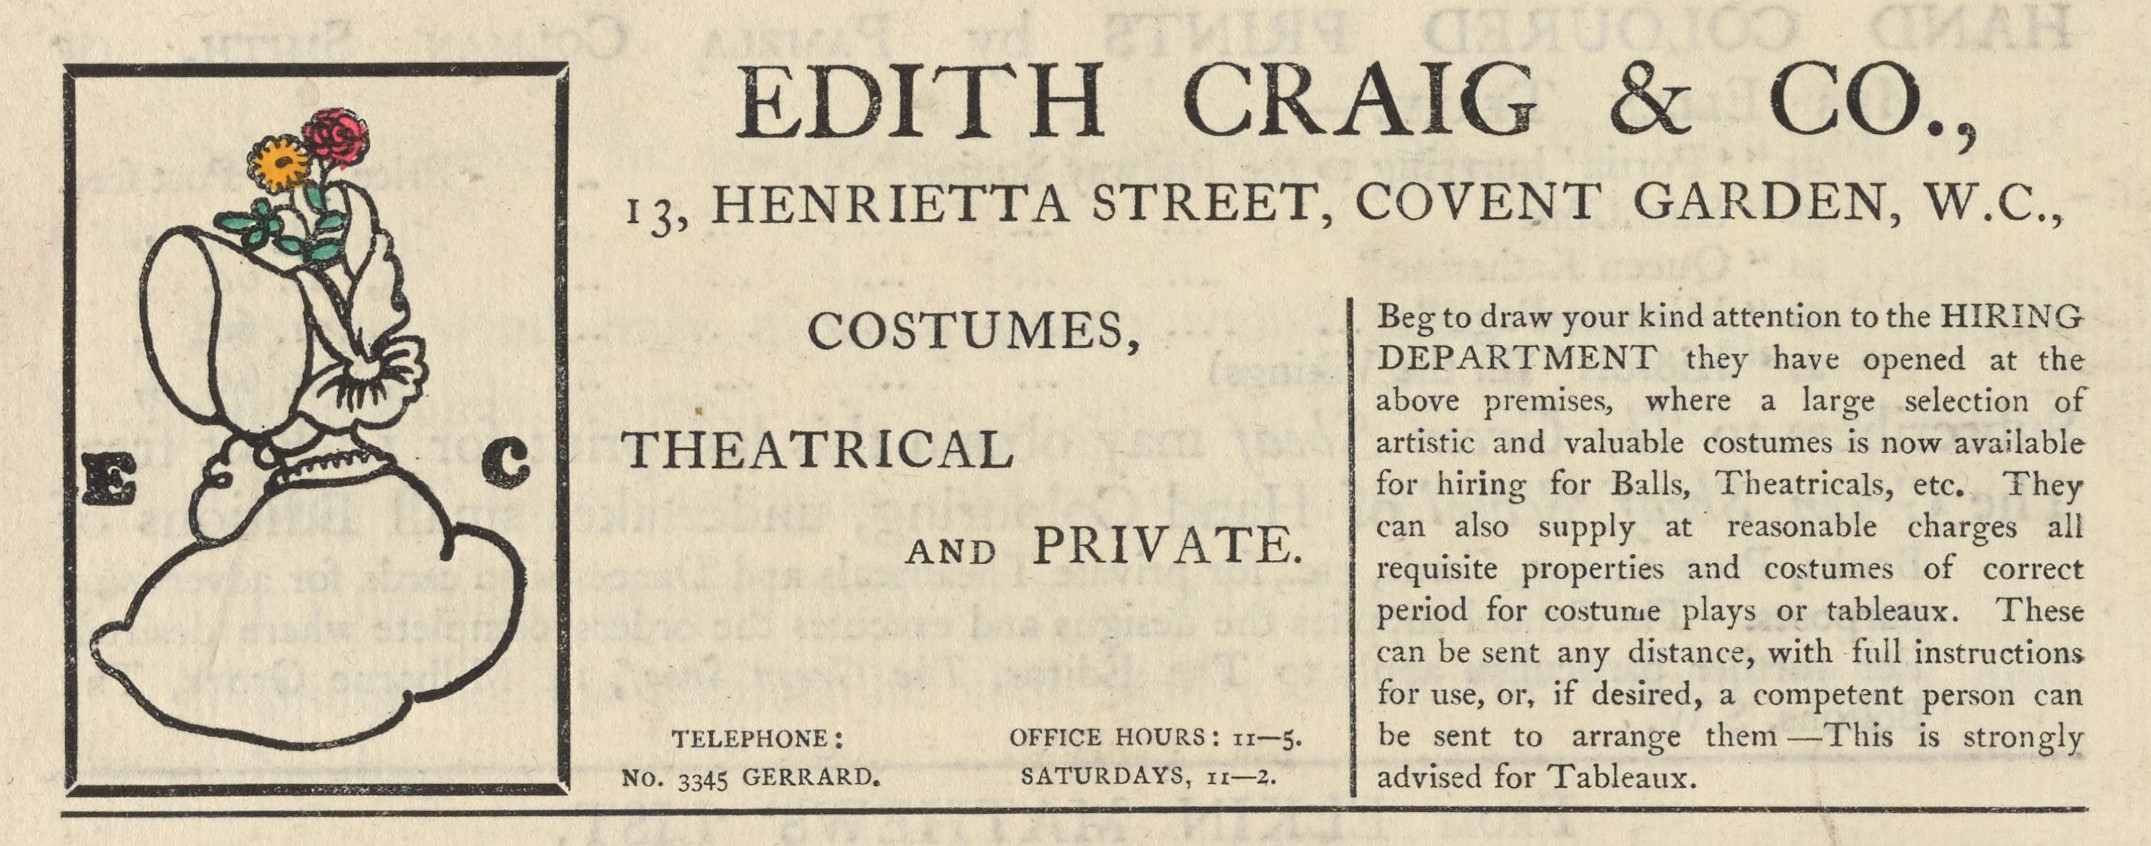 The illustrated advertisement occupies the top third of the page of advertisements.. The ad is titled “Edith Craig & Co.,” in a large serif font. Below the title, an address is printed: “13, Henrietta Street, Covent Garden, W.C.” To the left of the text is a small, coloured illustration with a black rectangular frame. It depicts a woman from the shoulders up, in profile, wearing a bonnet that hides her face. The bonnet is decorated with a pale yellow ribbon on the side and has two flowers with green leaves – a yellow daisy and a red rose – emerging from its top. The initials “E” and “C” are positioned to either side of the woman, in a heavy serif font. The text of the ad is divided into two columns beneath the title and address, and reads “Costumes, theatrical and private. Telephone: No. 3345 Gerrard. Office hours: 11-5. Saturdays, 11-2. Beg to draw your attention to the HIRING DEPARTMENT they have opened at the above premises, where a large selection of artistic and valuable costumes is now available for hiring for Balls, Theatricals, etc. They can also supply at reasonable charges all requisite properties and costumes of correct period for costume plays or tableaux. These can be sent any distance, with full instructions for use, or, if desired, a competent person can be sent to arrange them.—This is strongly advised for Tableaux.”